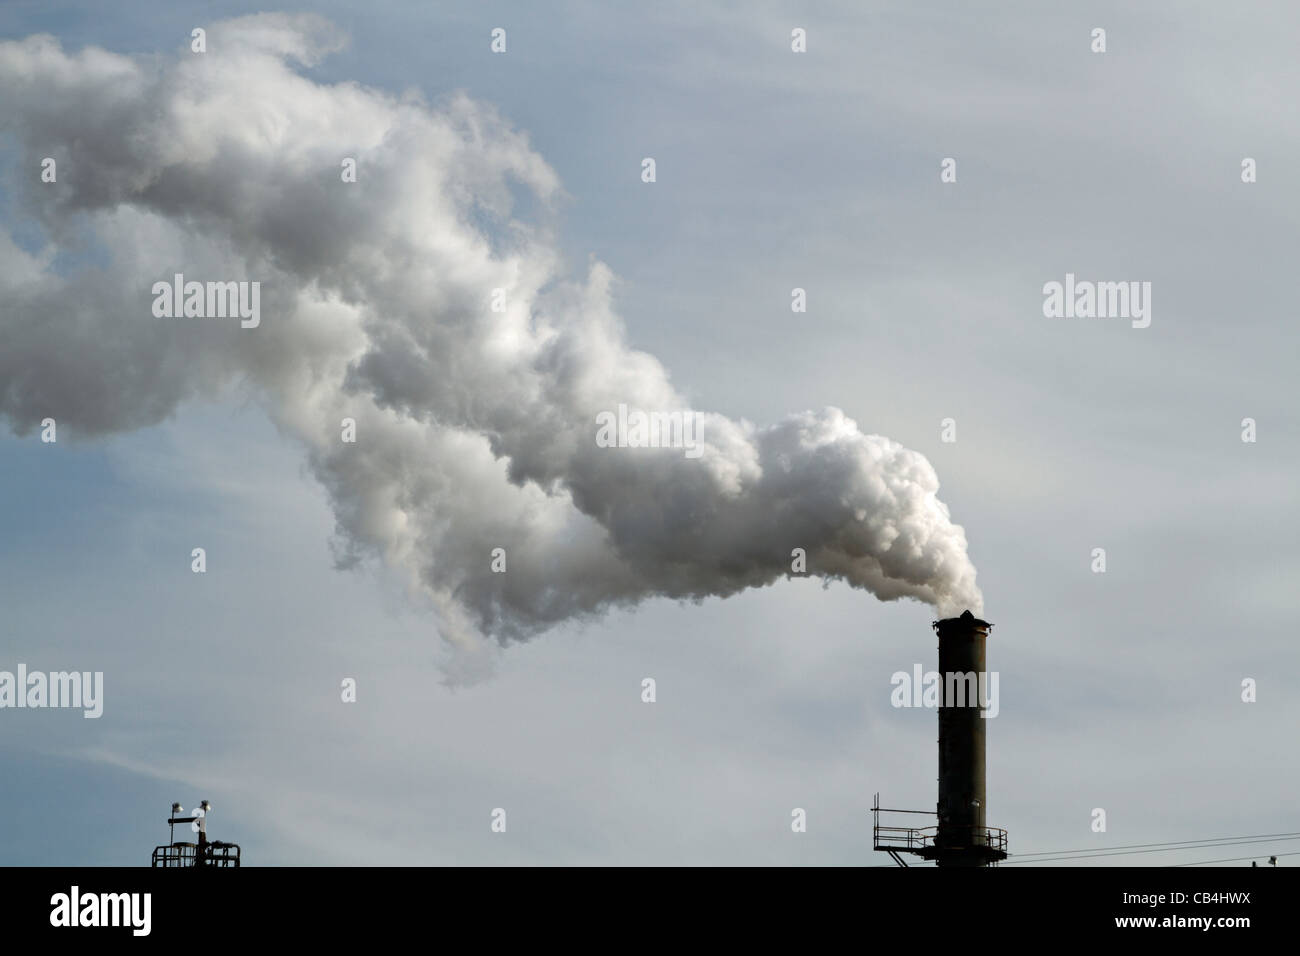 A Smokestack at the Port Reading Refinery (Hess Oil Refinery) at Perth Amboy/Woodbridge, New Jersey, USA Stock Photo